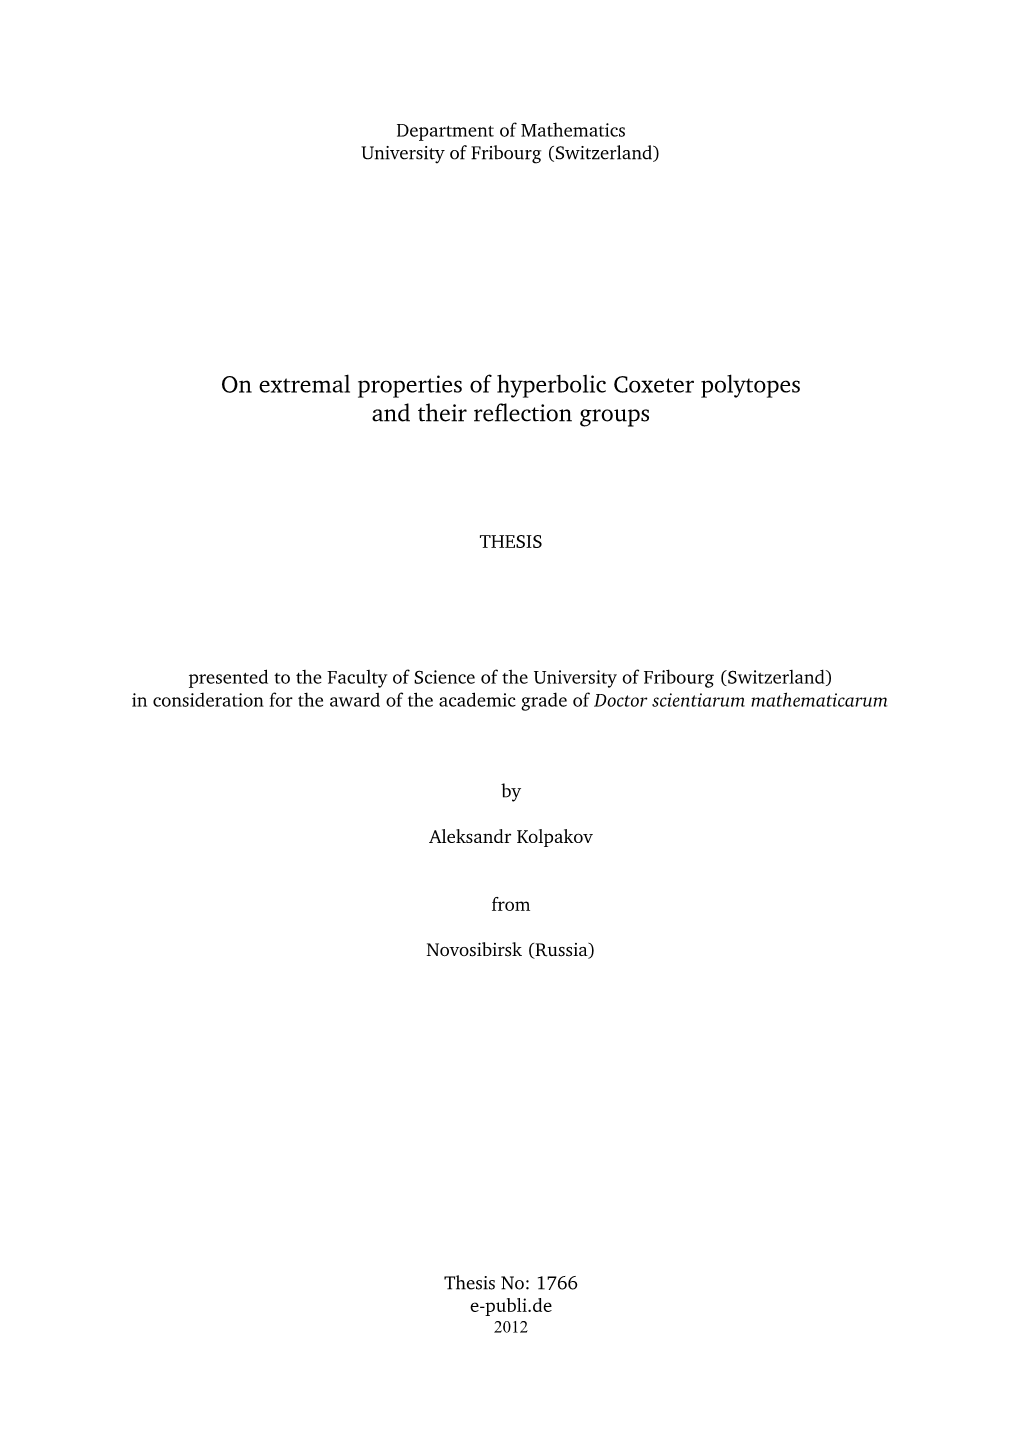 On Extremal Properties of Hyperbolic Coxeter Polytopes and Their Reflection Groups